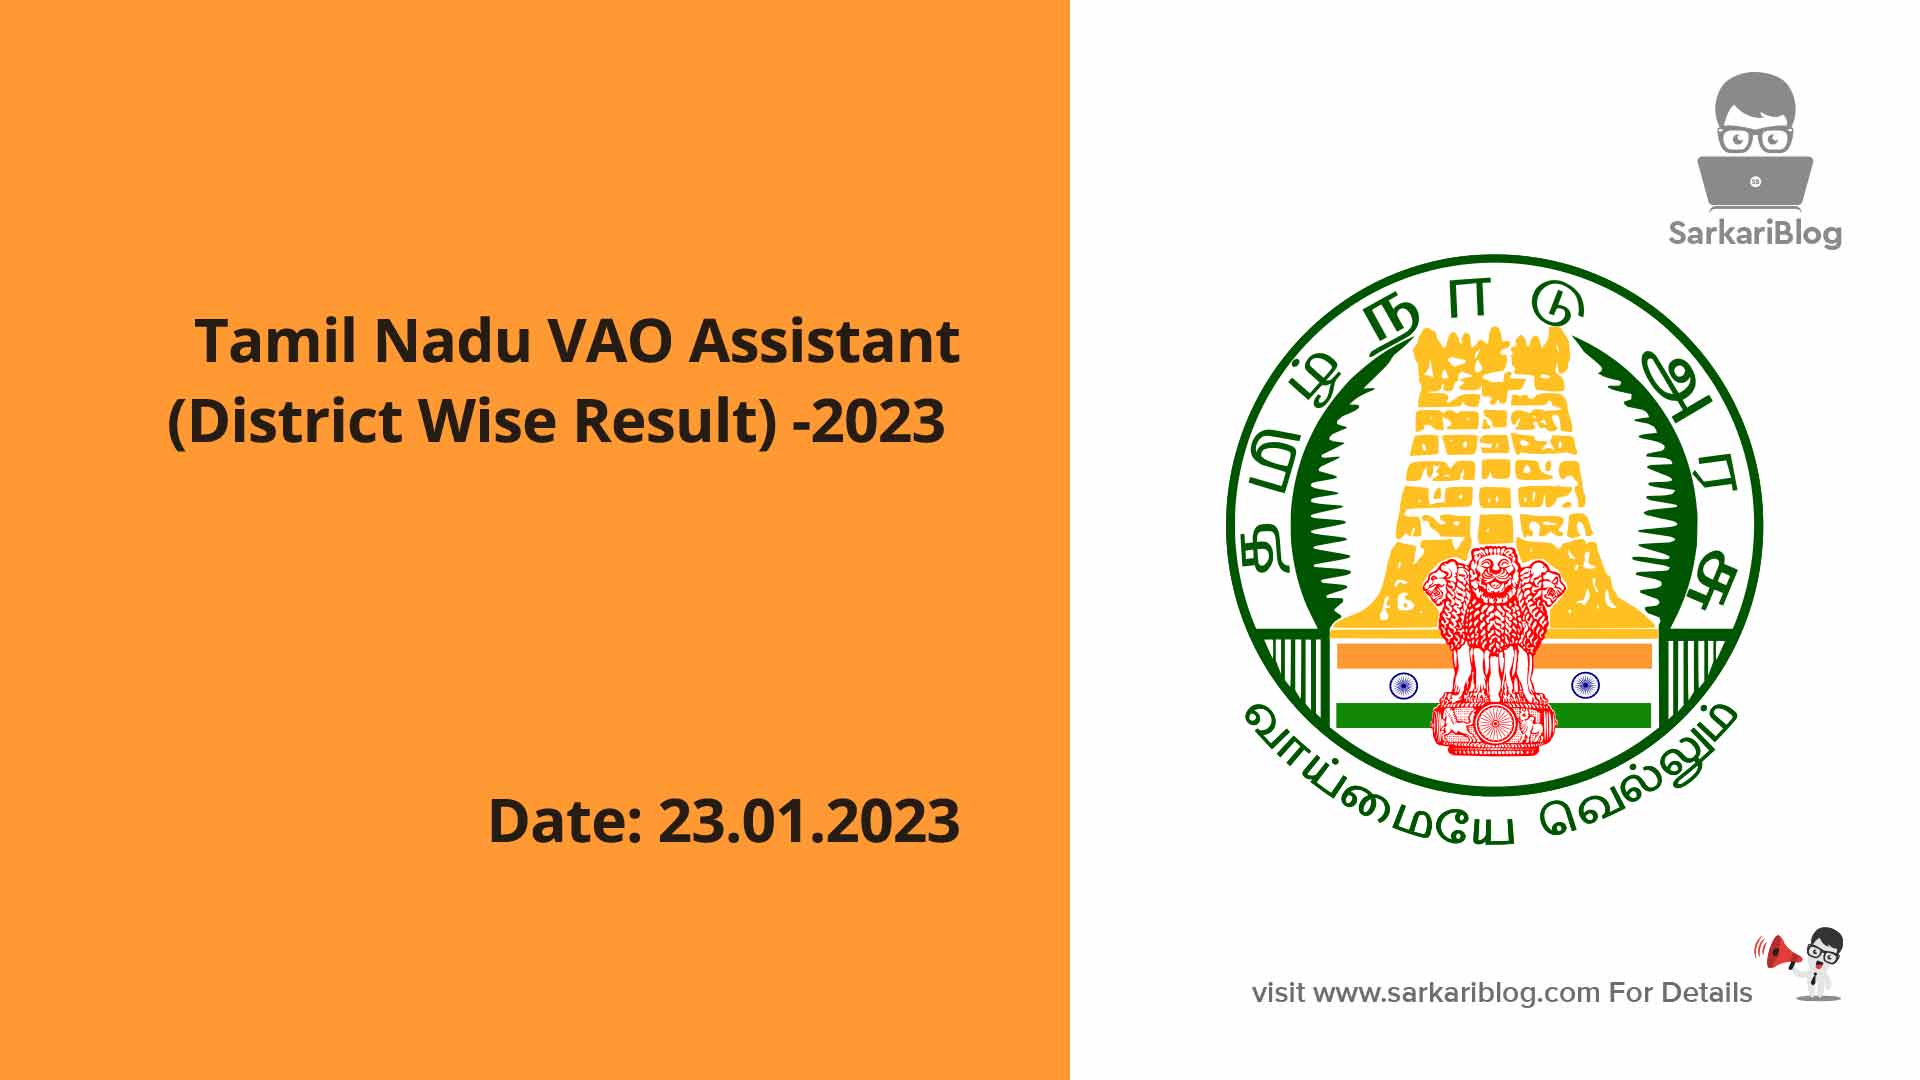 TN VAO Assistant (District Wise Result) Results 2023